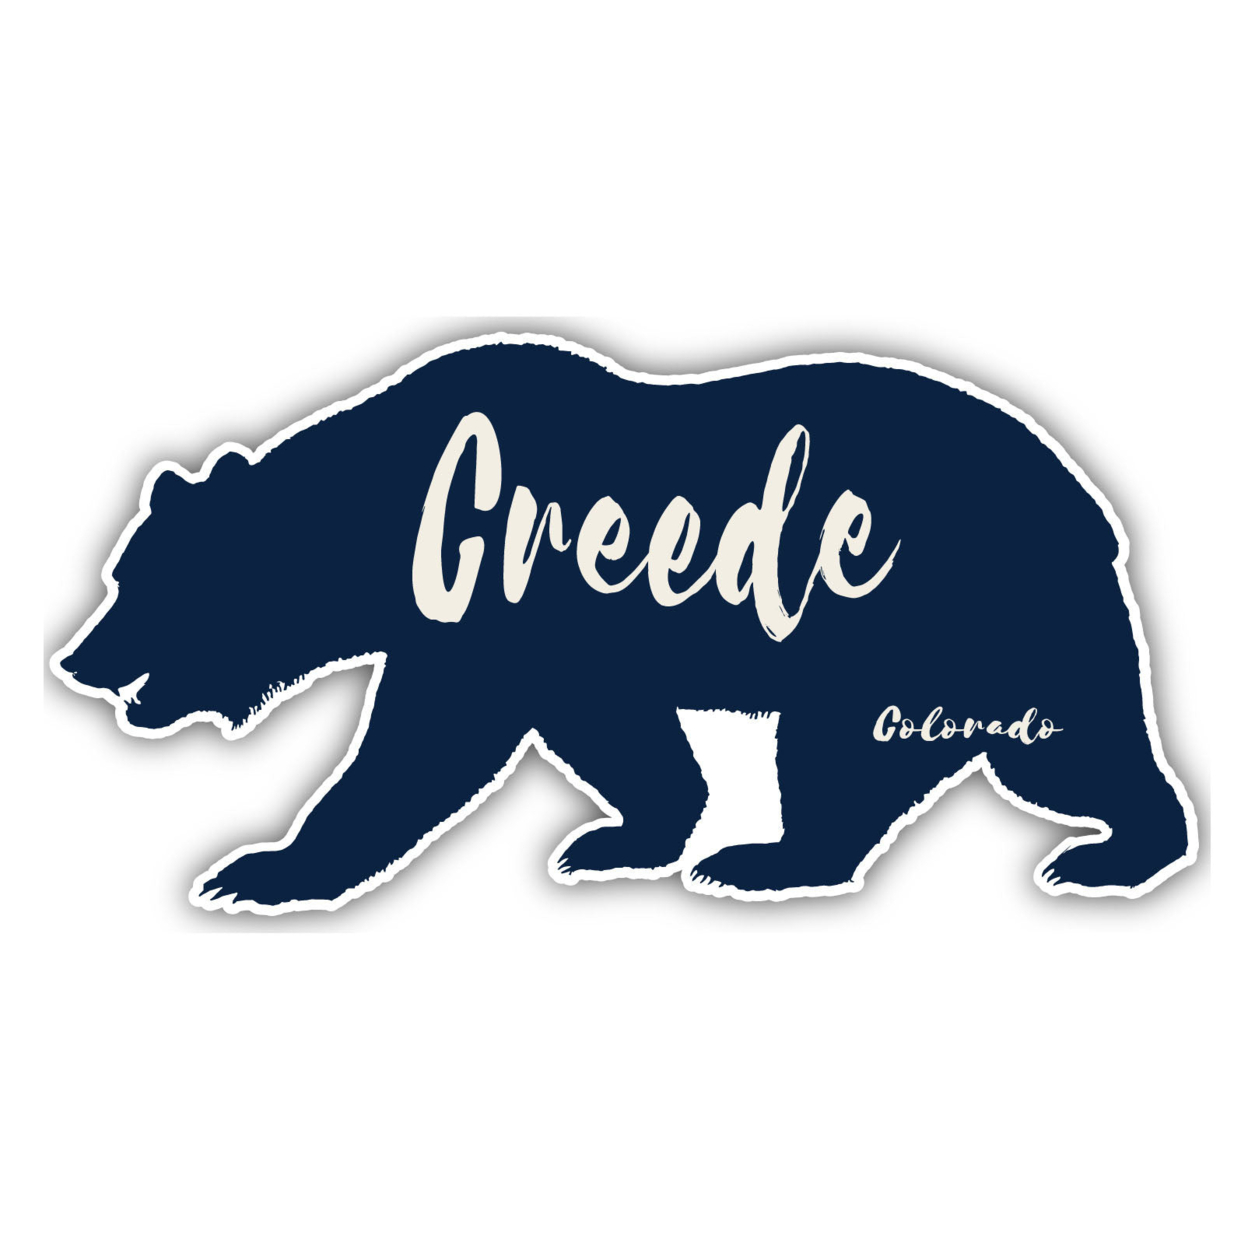 Creede Colorado Souvenir Decorative Stickers (Choose Theme And Size) - 4-Pack, 12-Inch, Tent